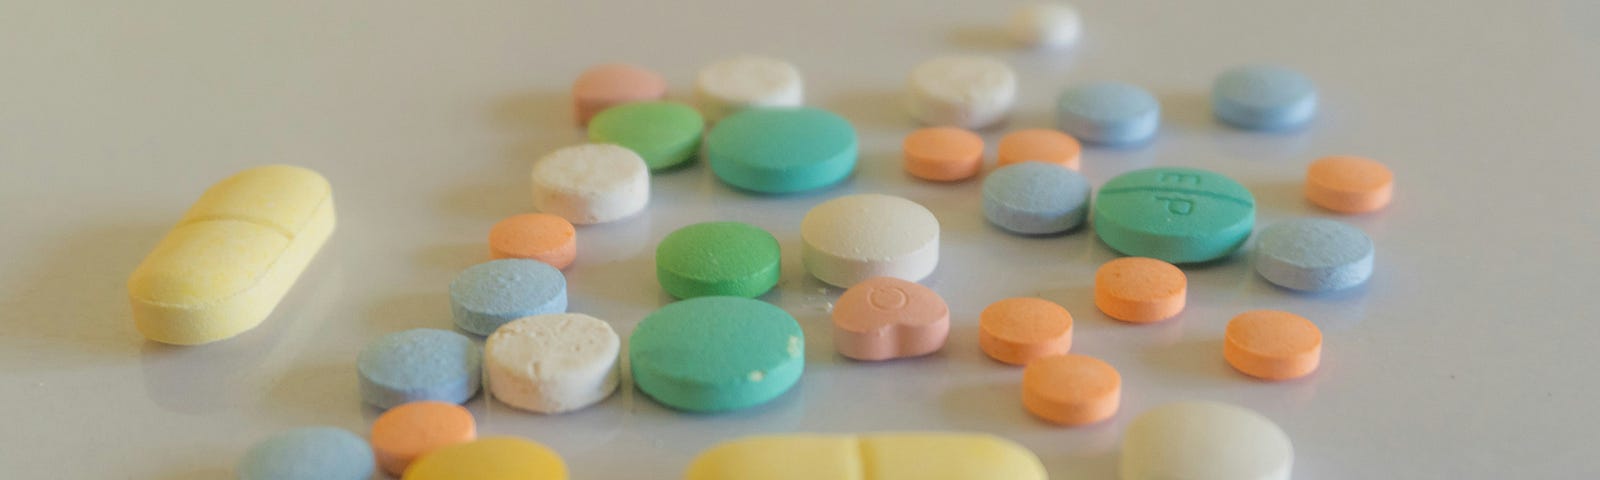 Different colored, different-sized pills.